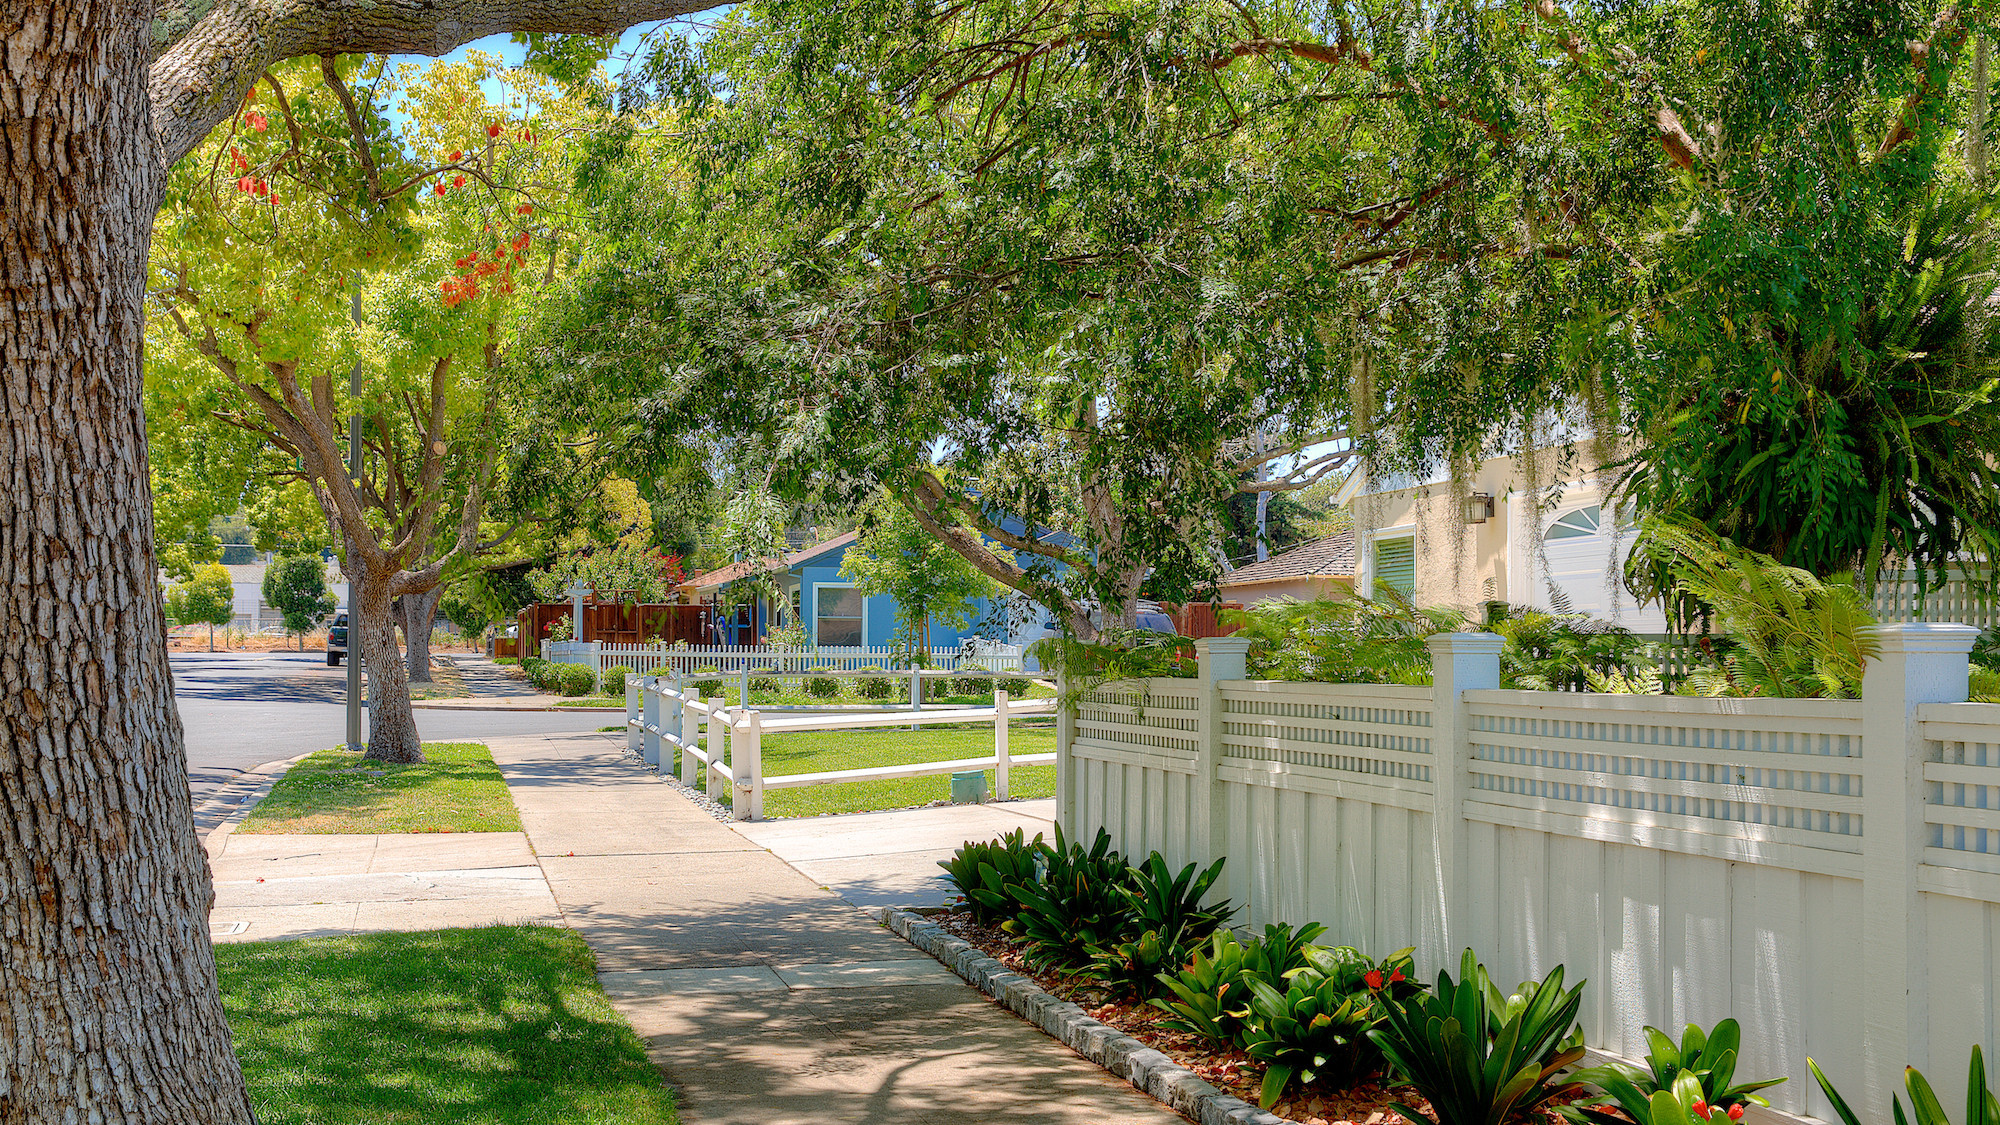 Sidewalk view and a white picket fence in the Lenolt area in Redwood City